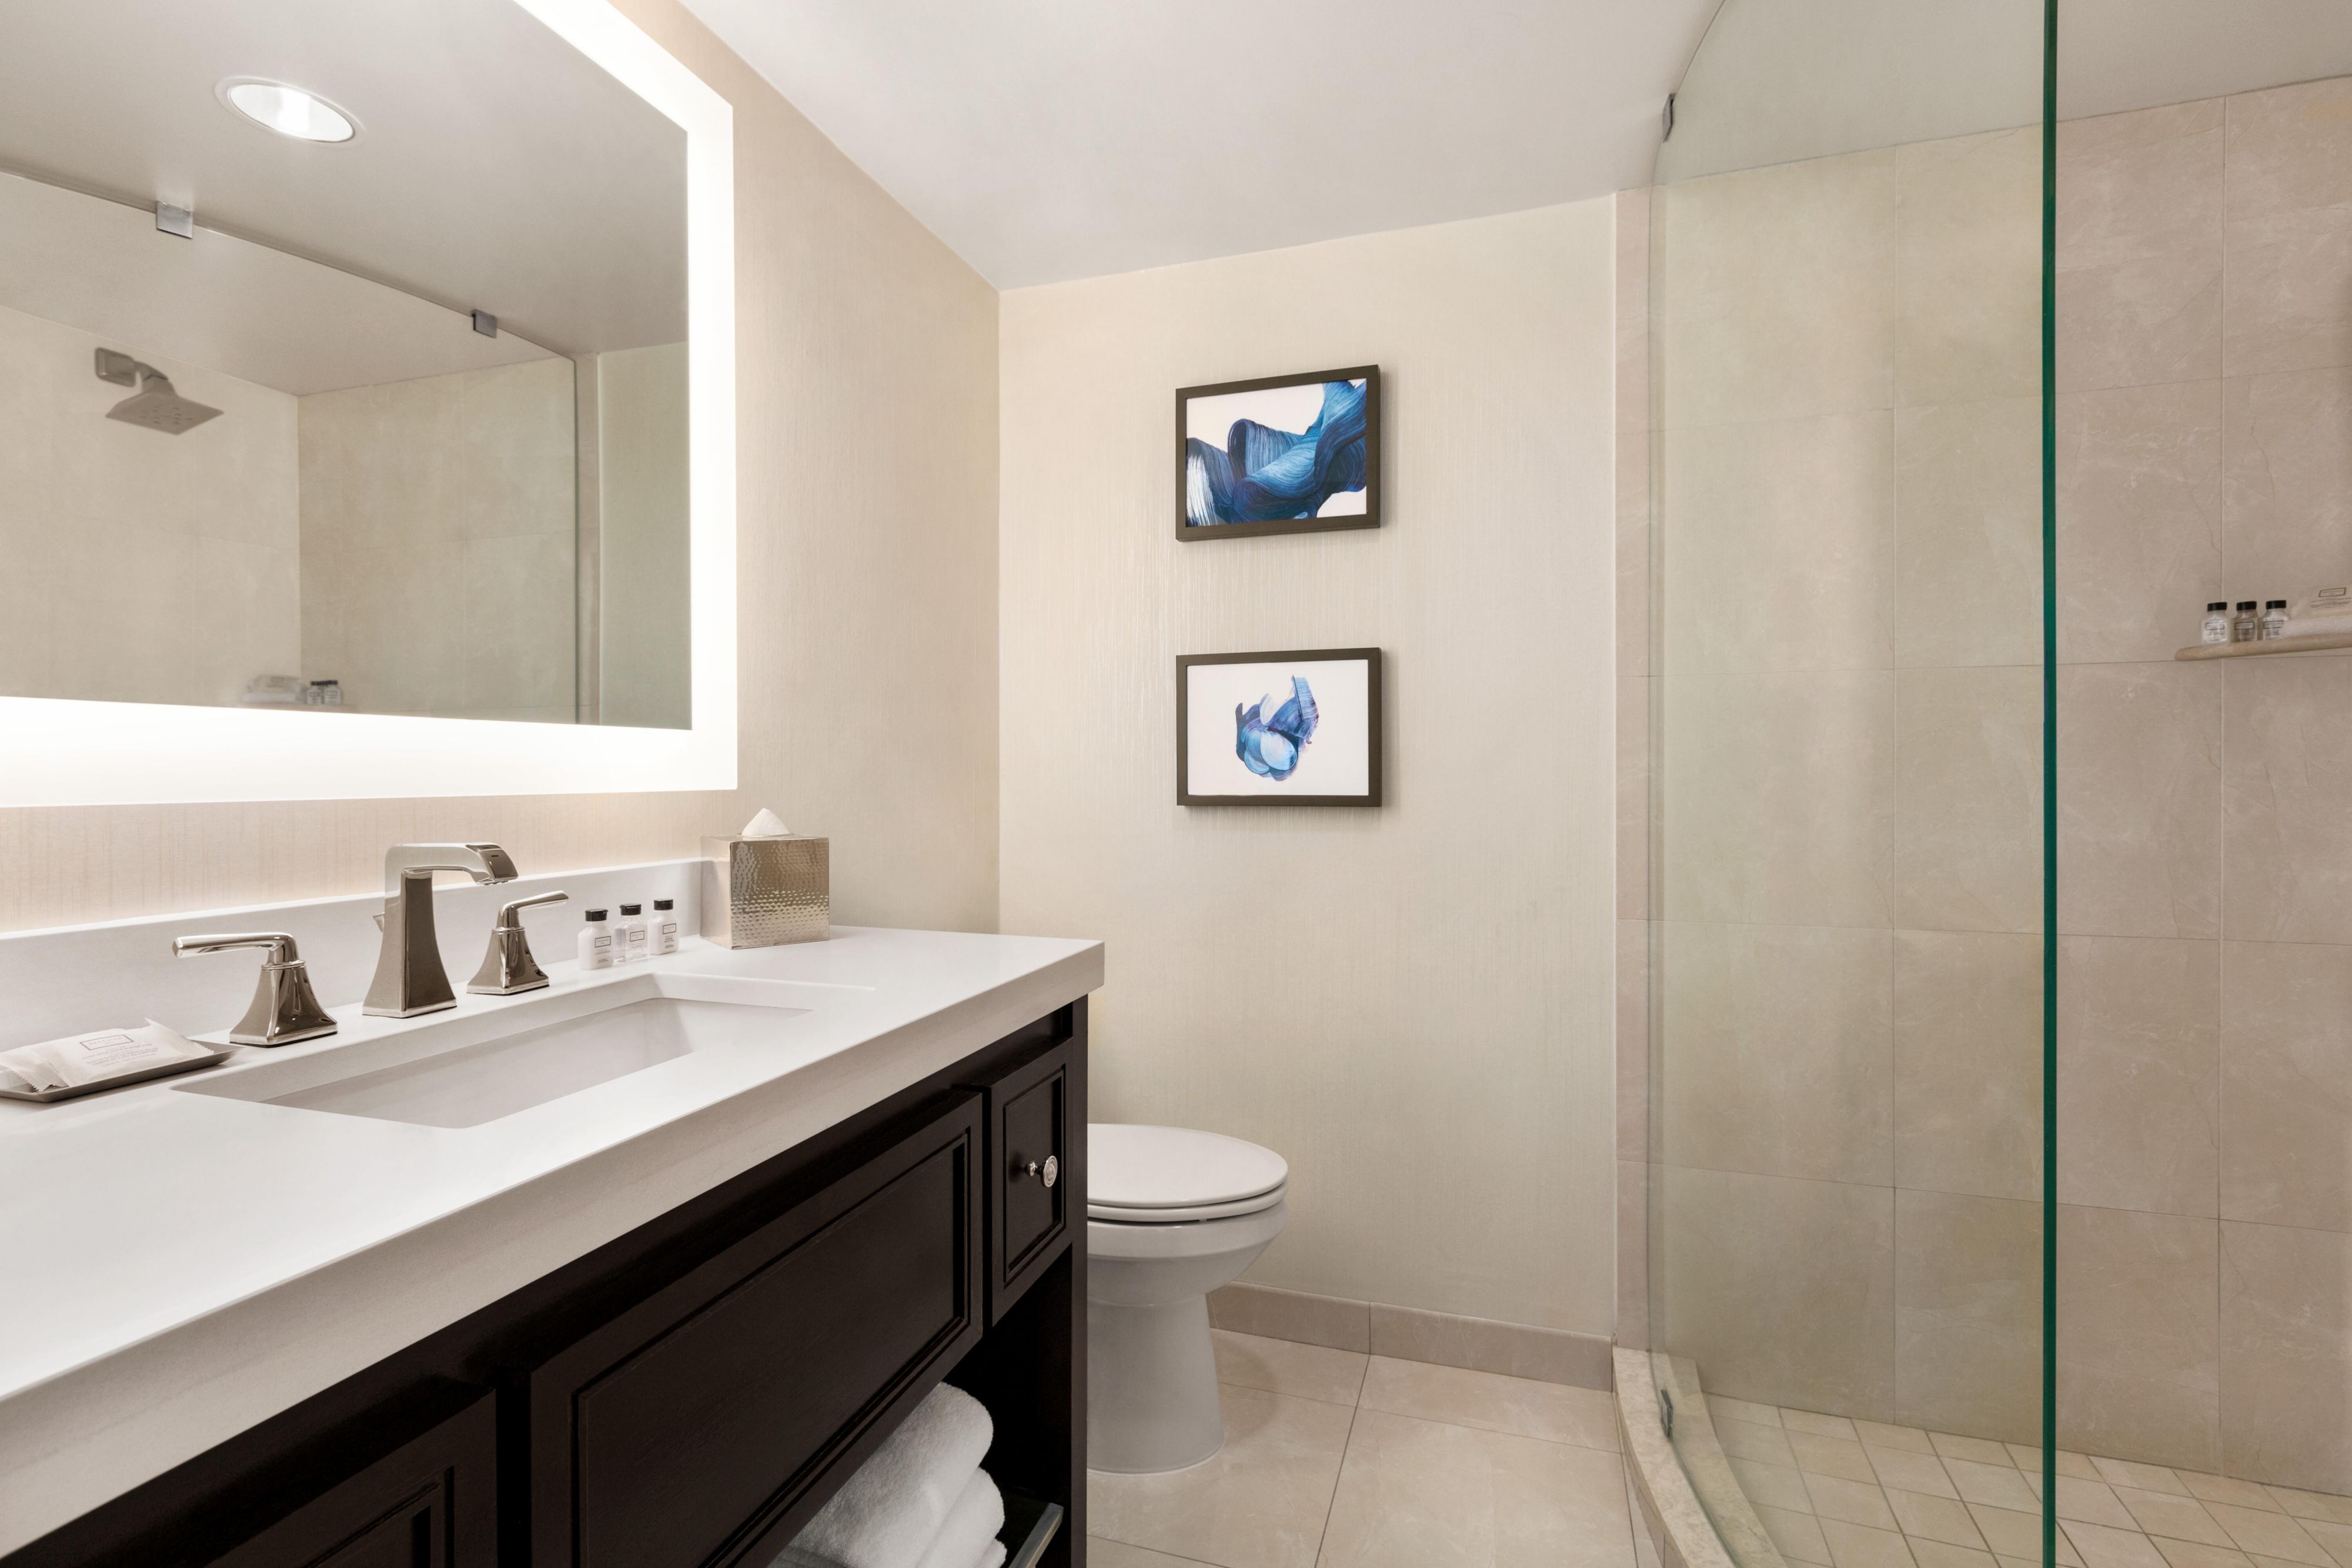 Our modern guest bathrooms include the essentials for any traveler